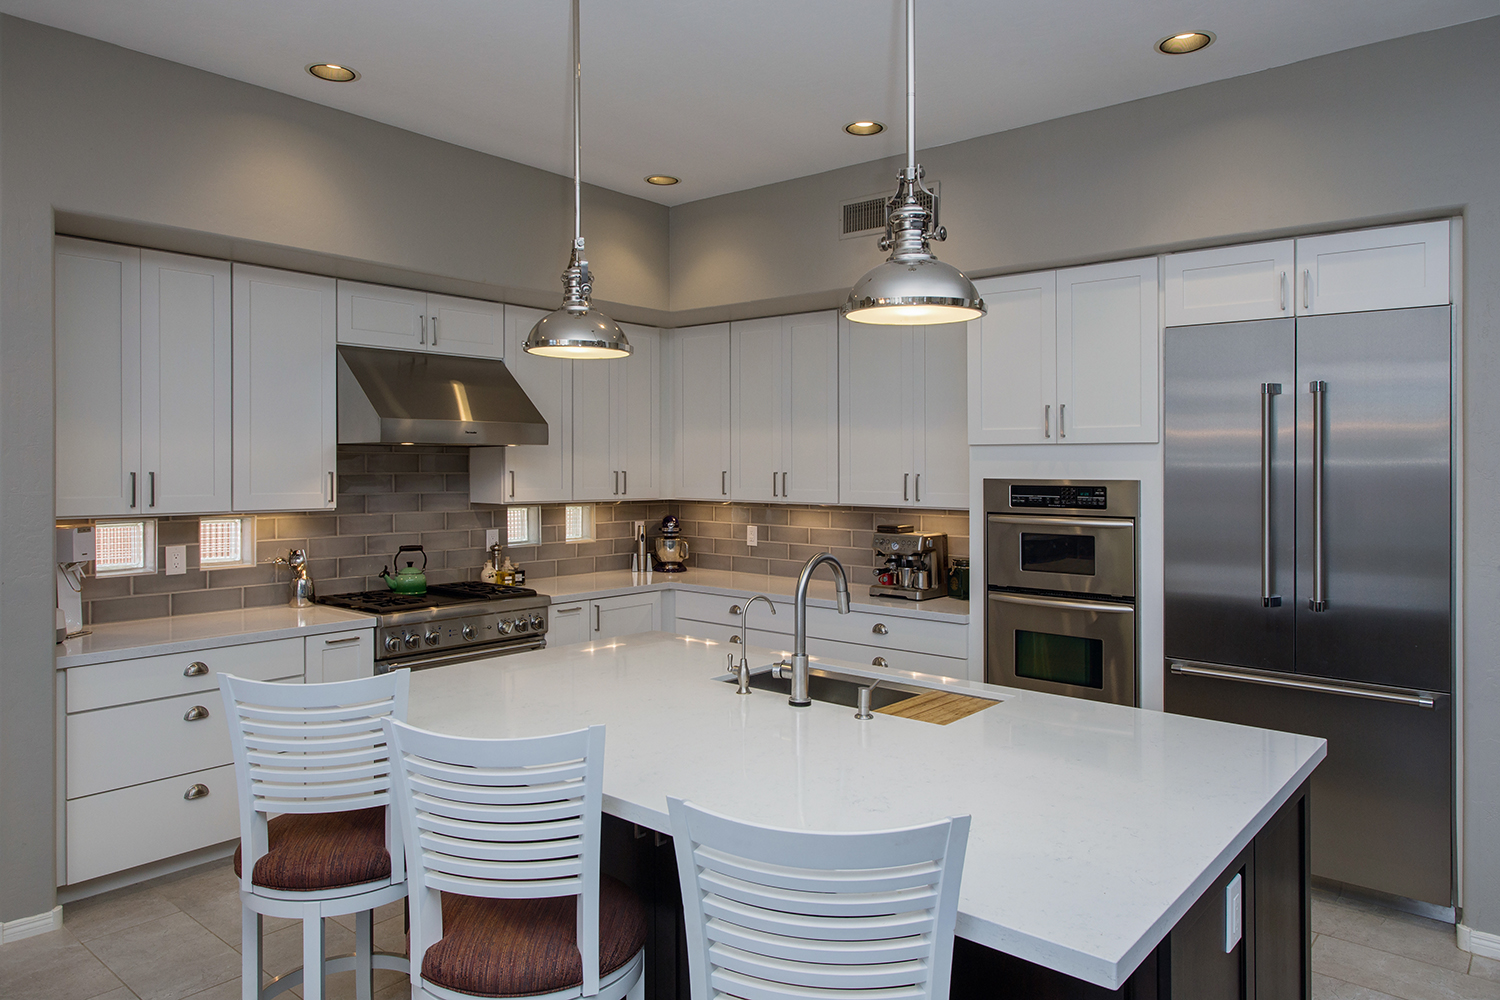 Phoenix kitchen remodel contractor hochuli design and remodeling team